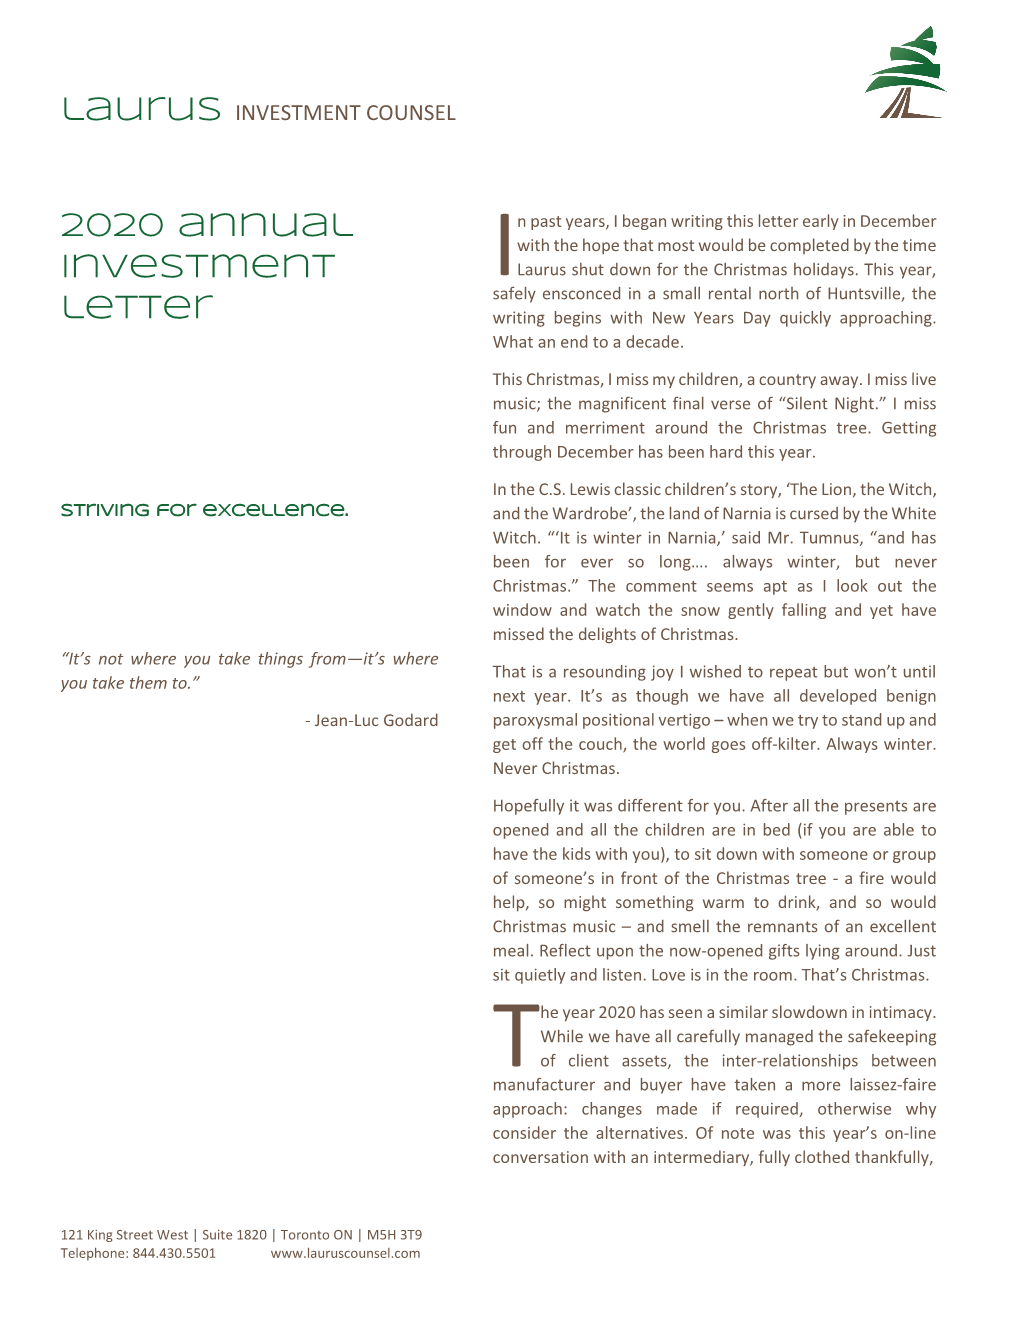 2020 Annual Investment Letter